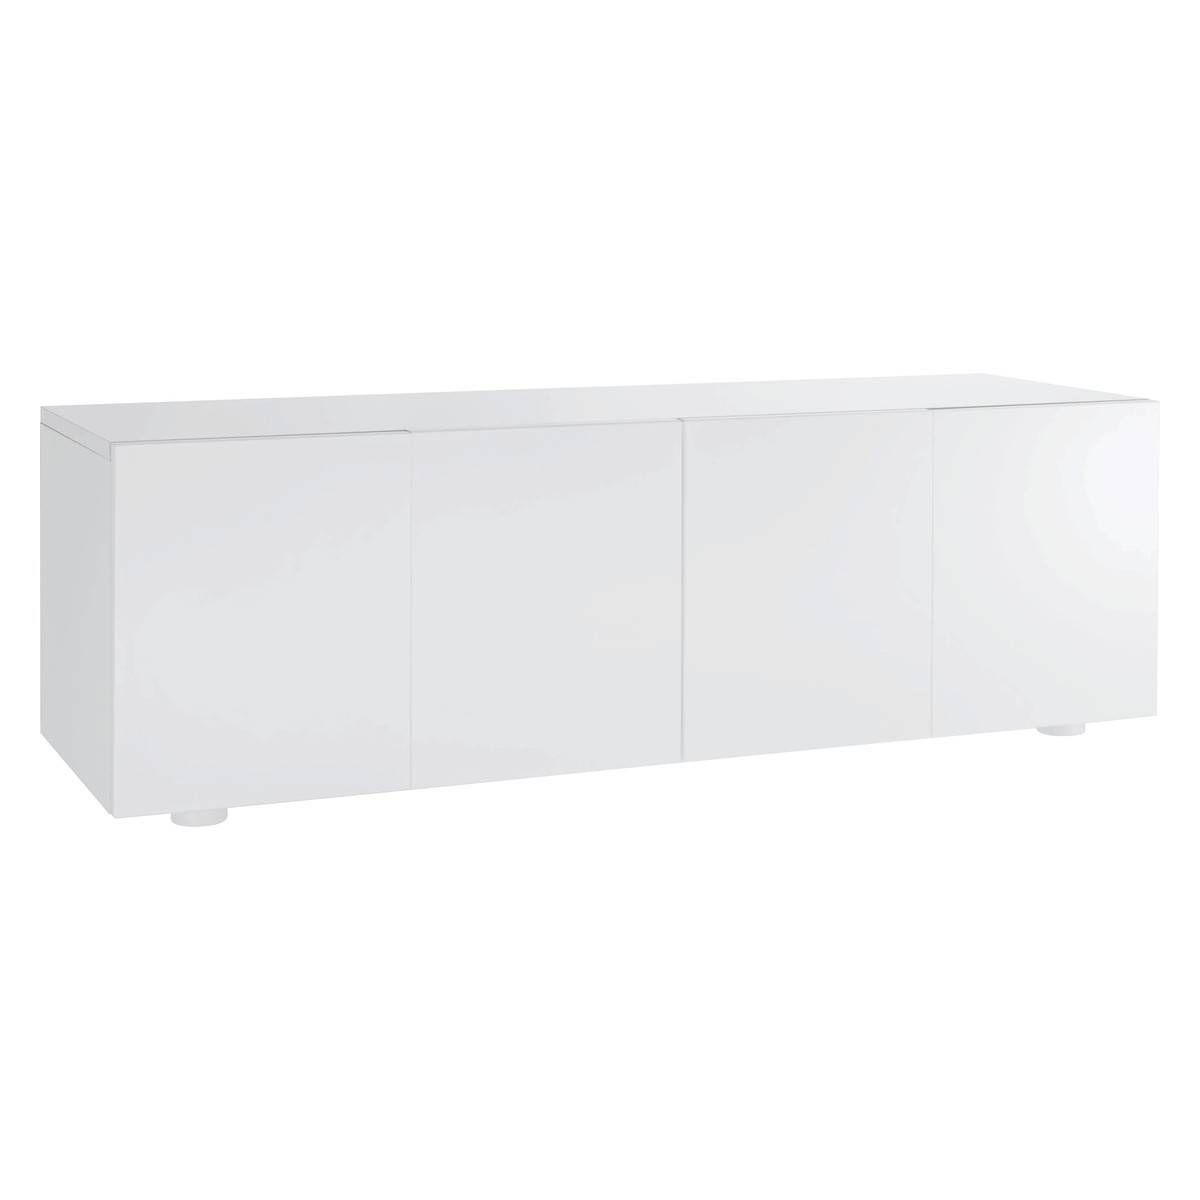 Aspen White High Gloss Long Cabinet | Buy Now At Habitat Uk Within Cheap White High Gloss Sideboard (Photo 9 of 20)